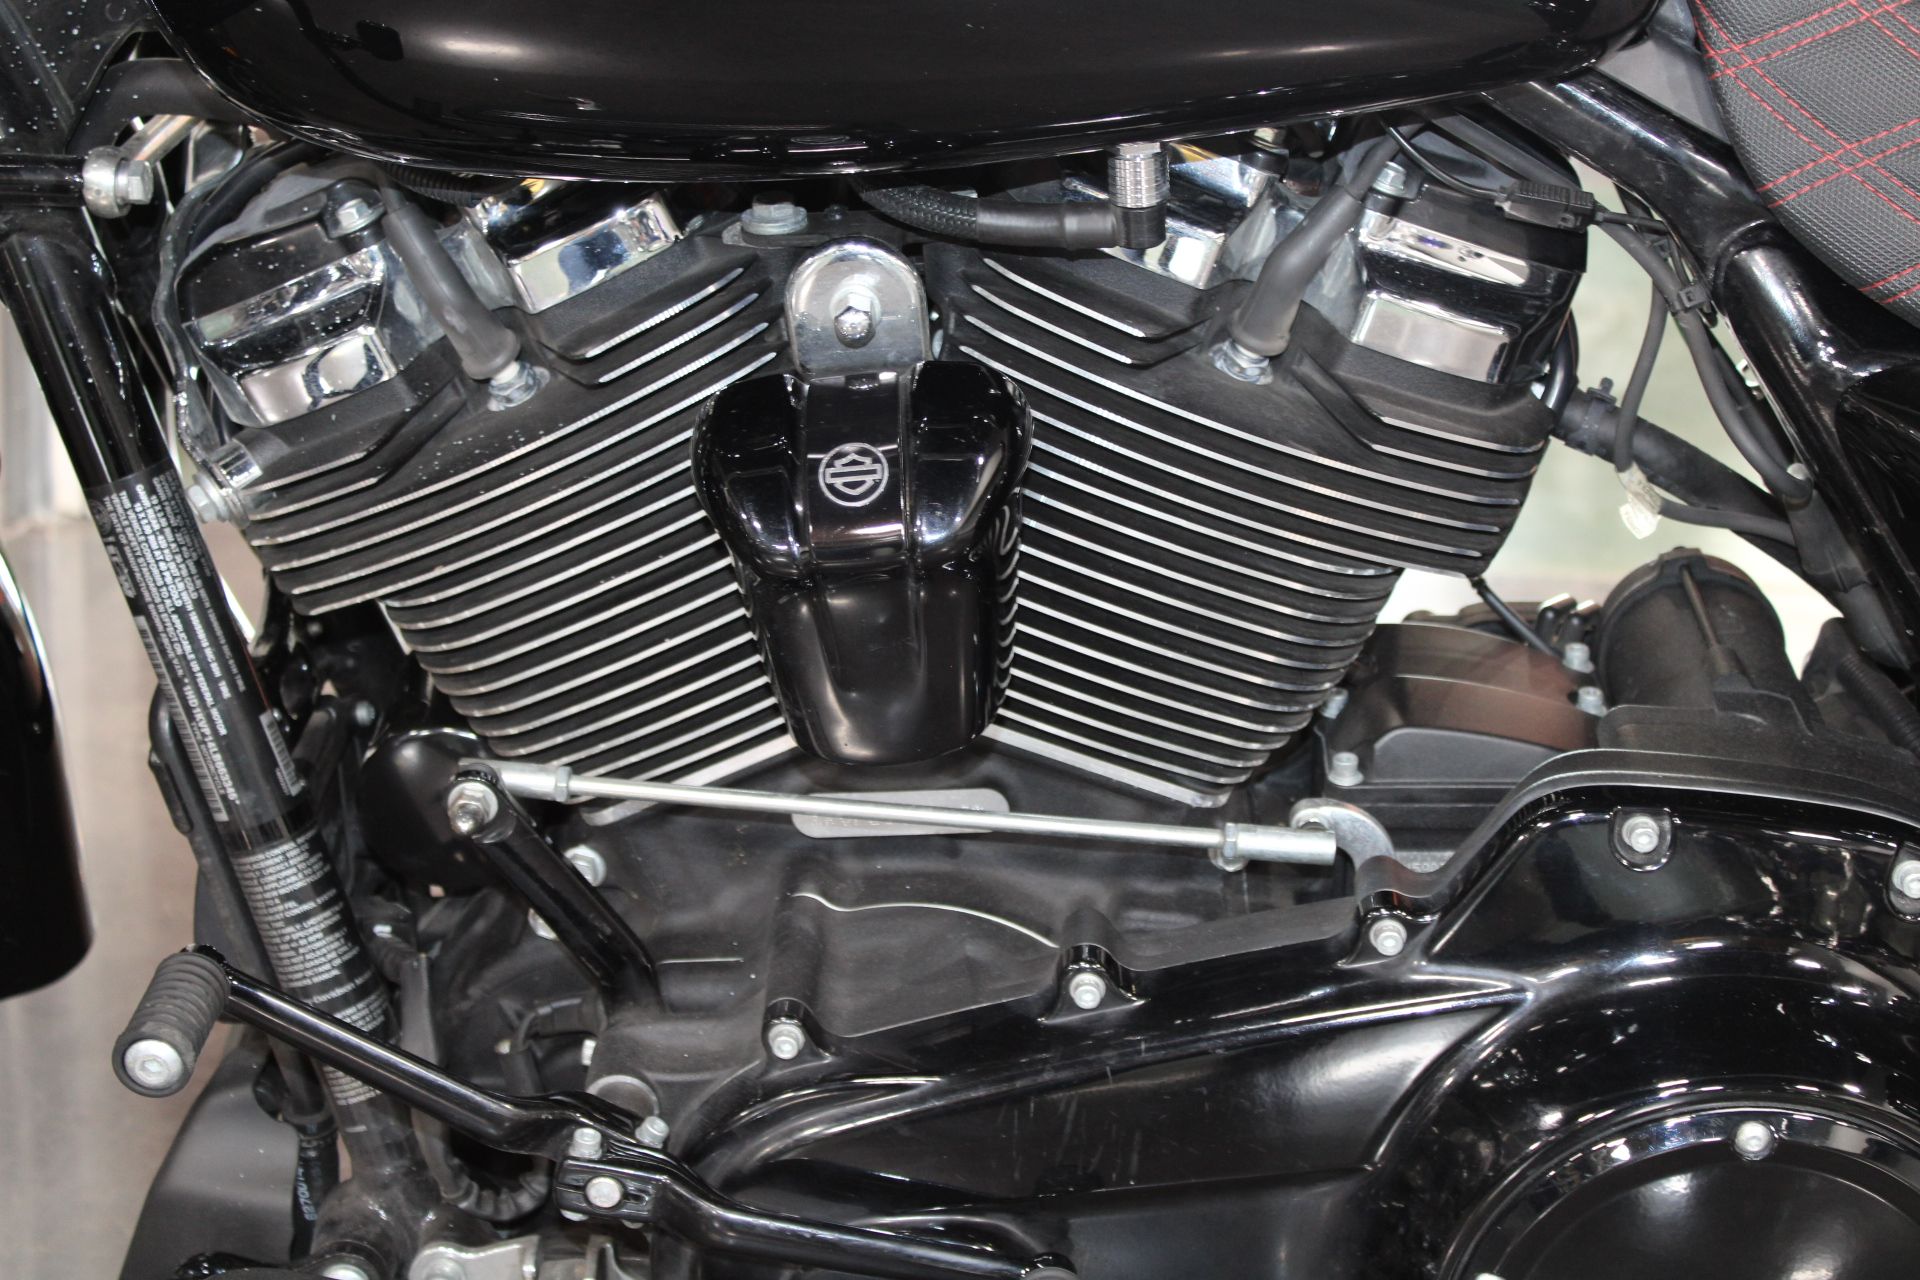 2020 Harley-Davidson Road King® Special in Shorewood, Illinois - Photo 15